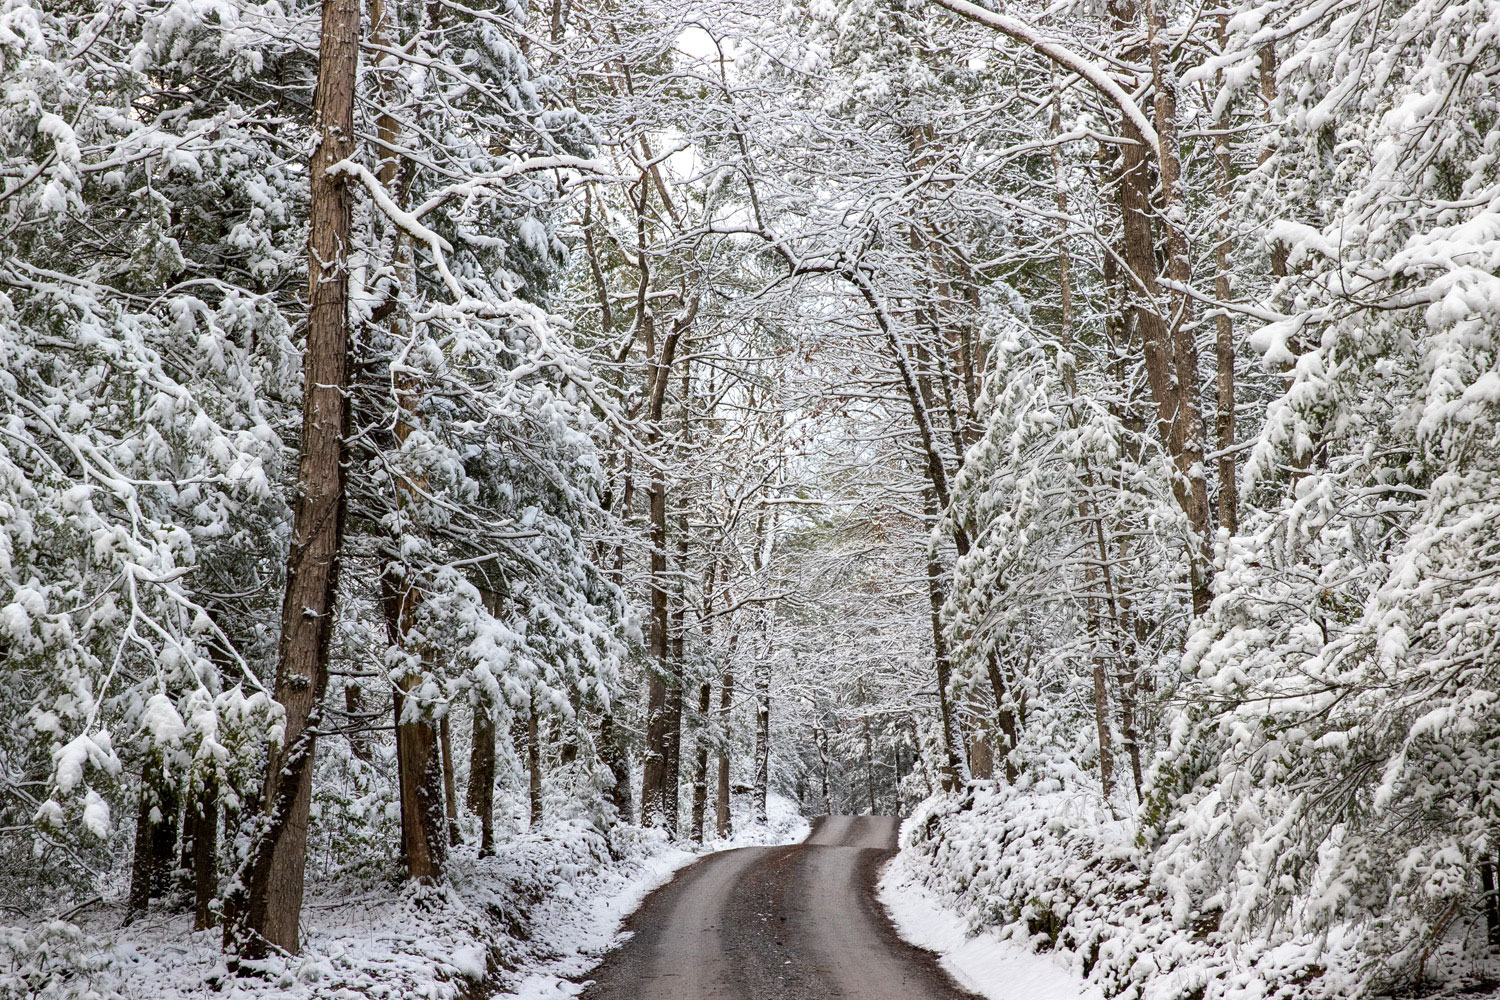 A heavy wet snow blankets the hemlocks and first along Sparks Lane.